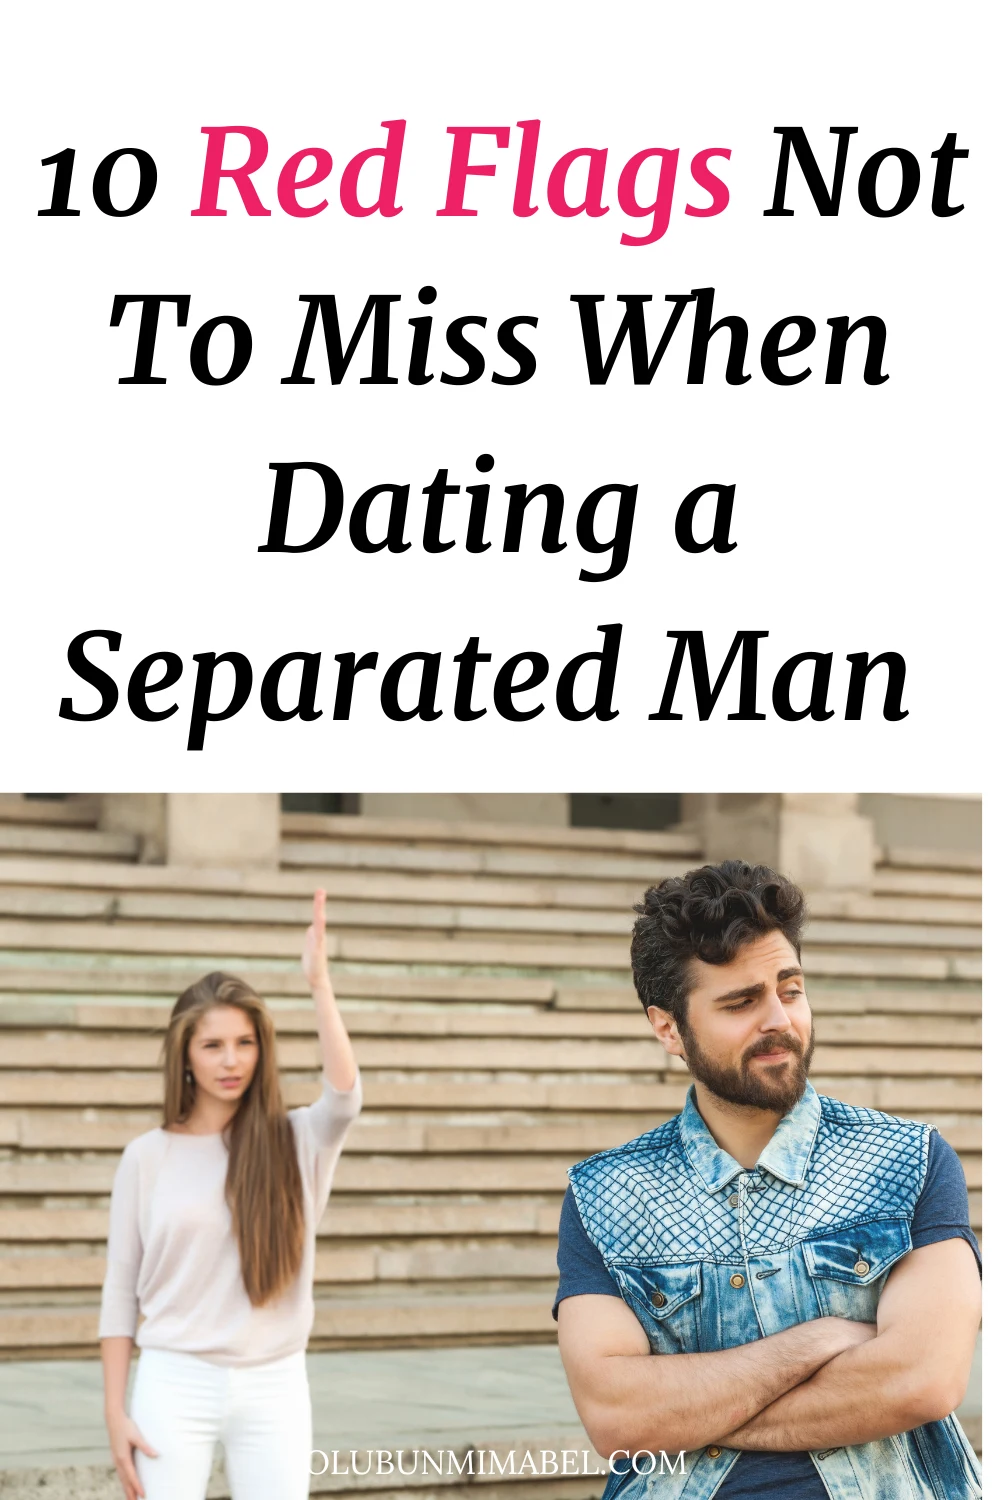 Dating a Separated Man Red Flags